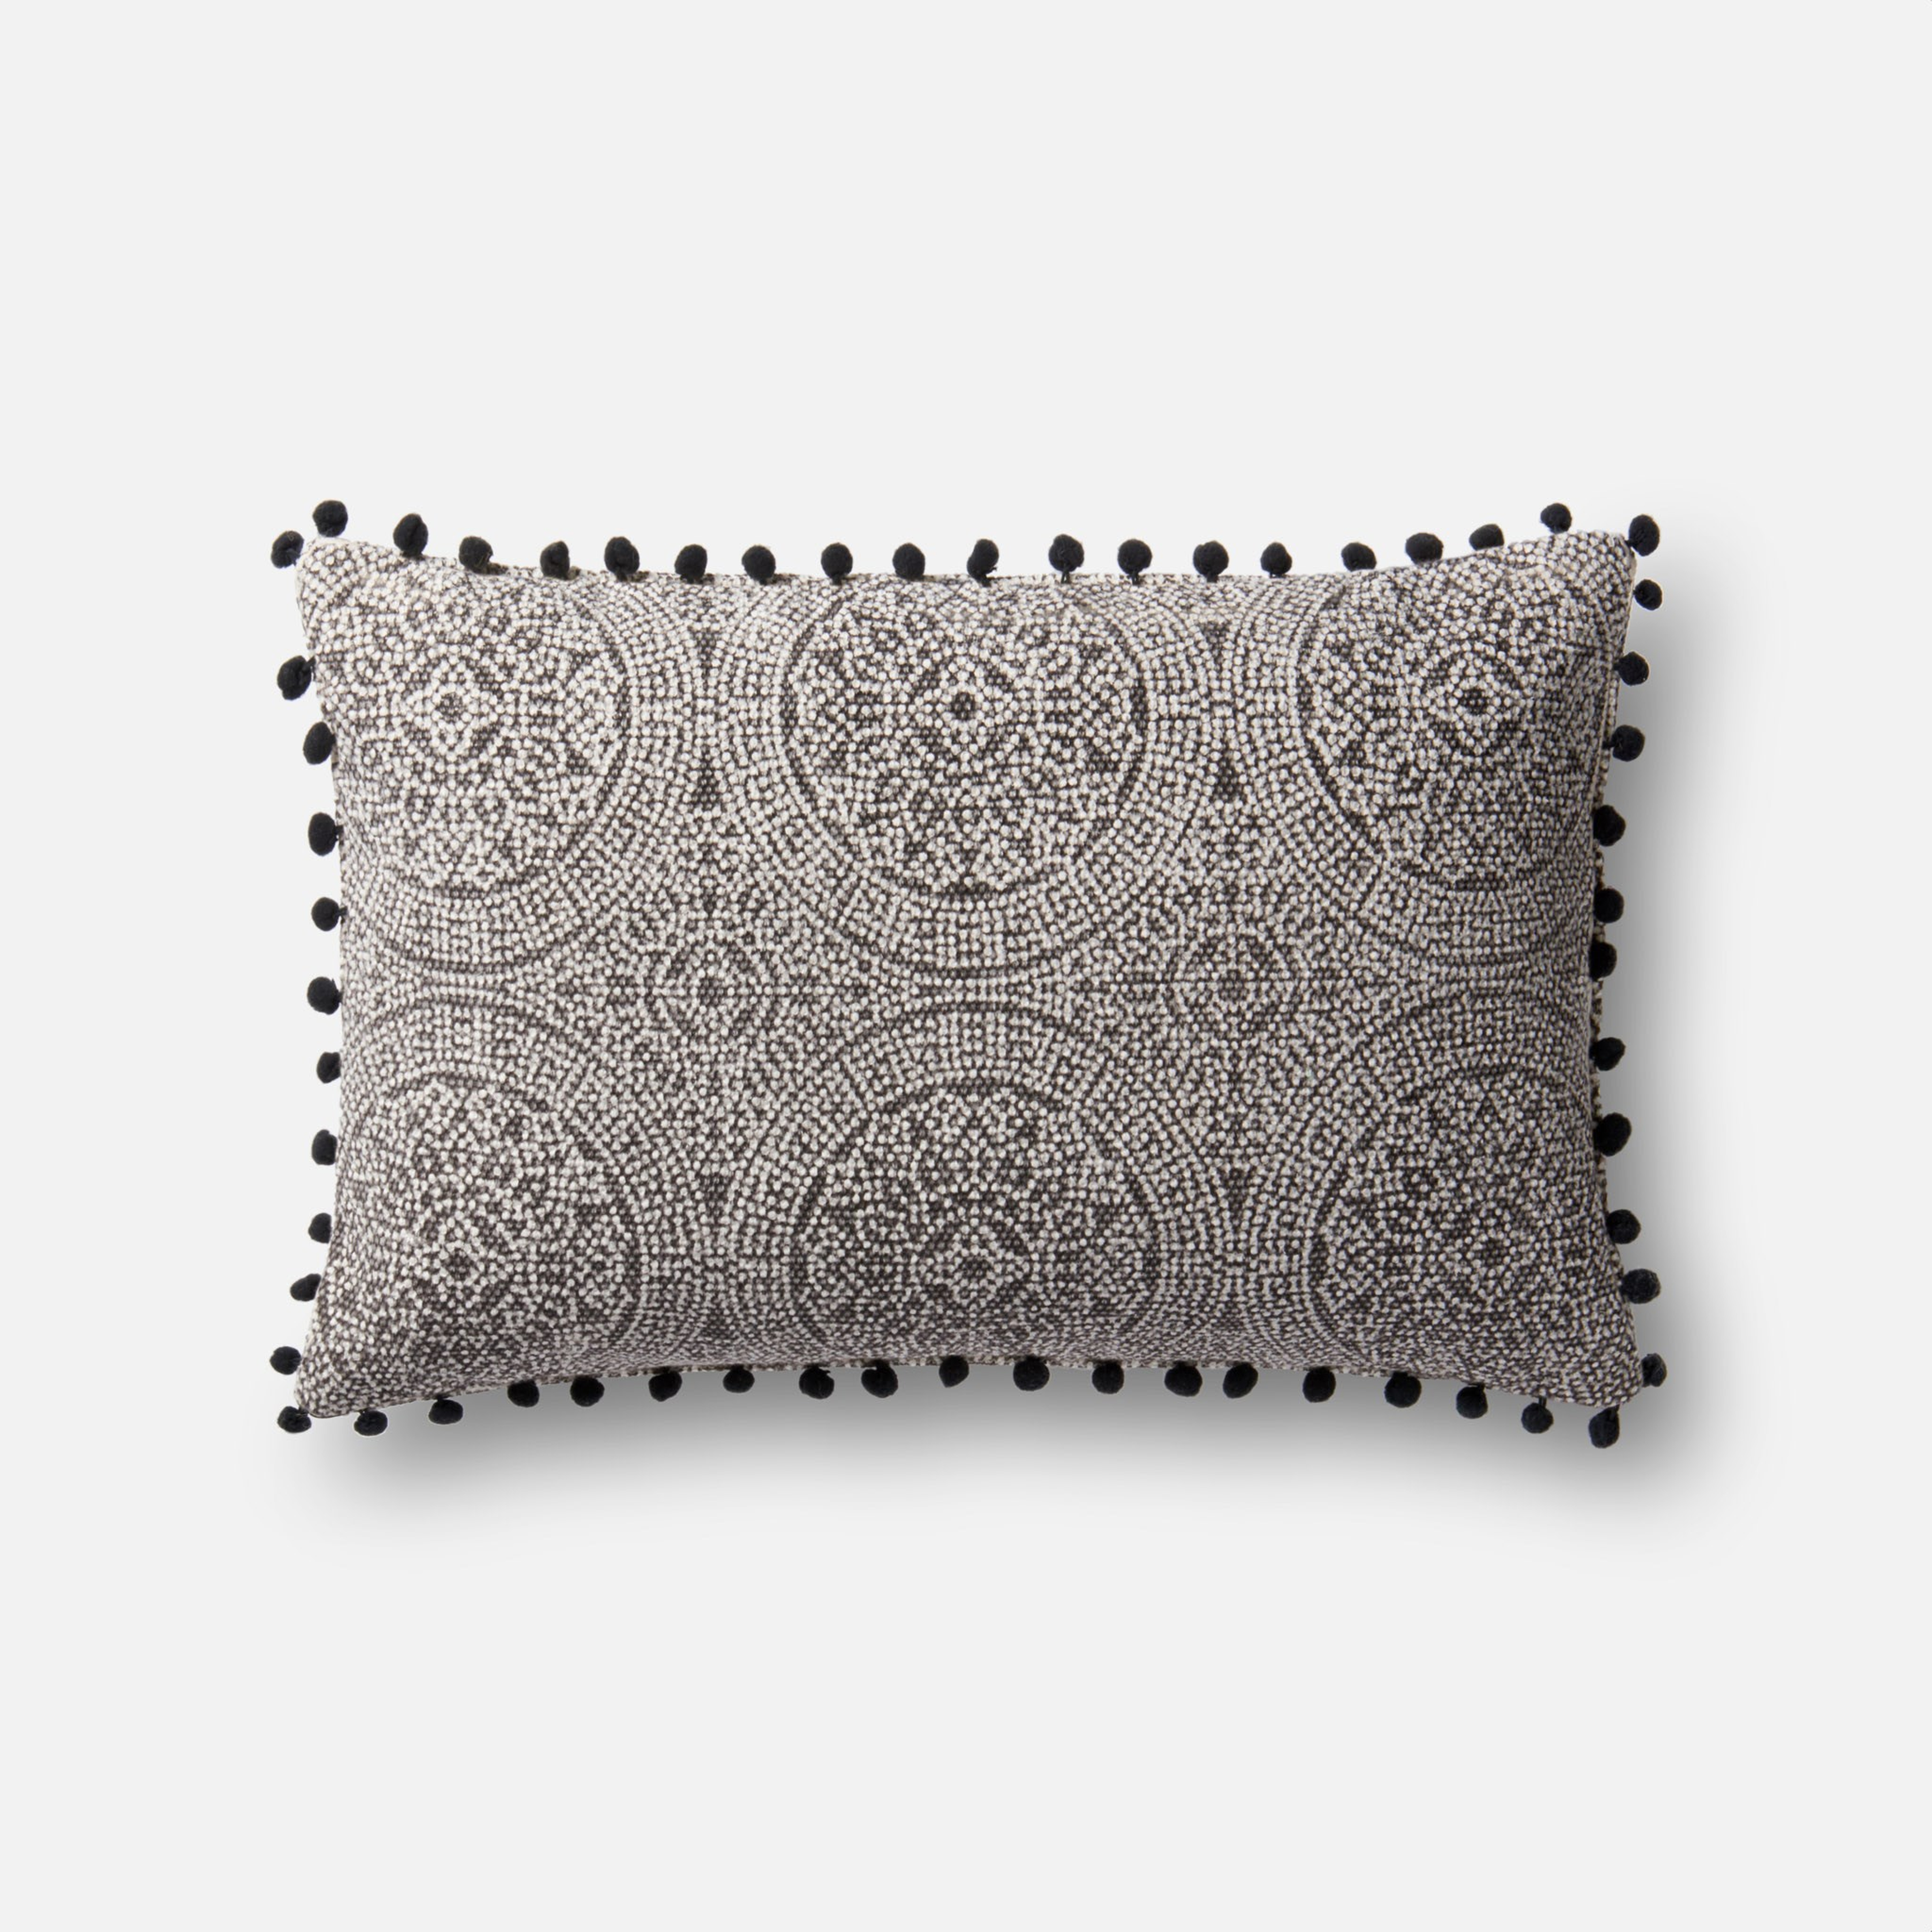 PILLOWS - CHARCOAL / BLACK - Magnolia Home by Joana Gaines Crafted by Loloi Rugs